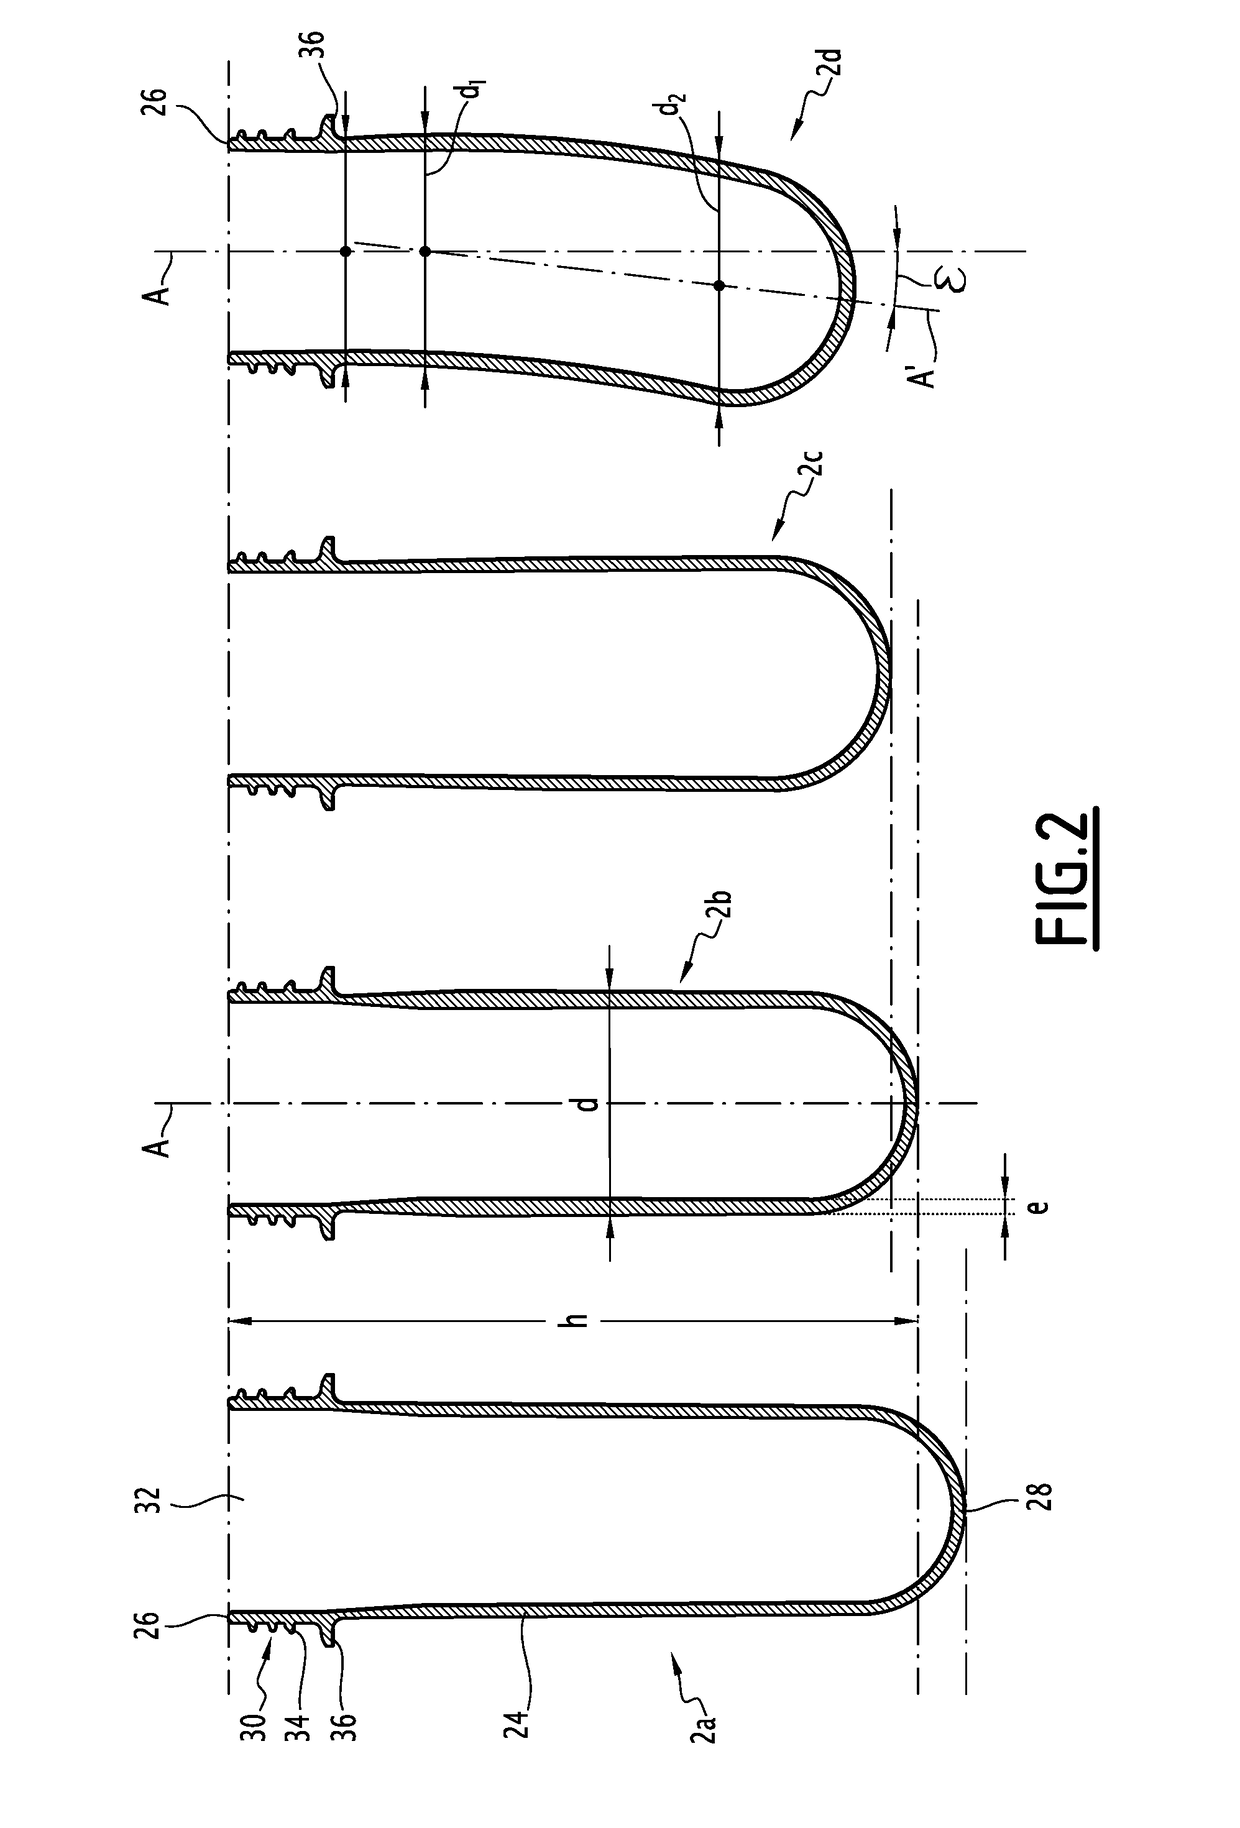 Method and machine for producing containers by injecting a liquid inside successive preforms